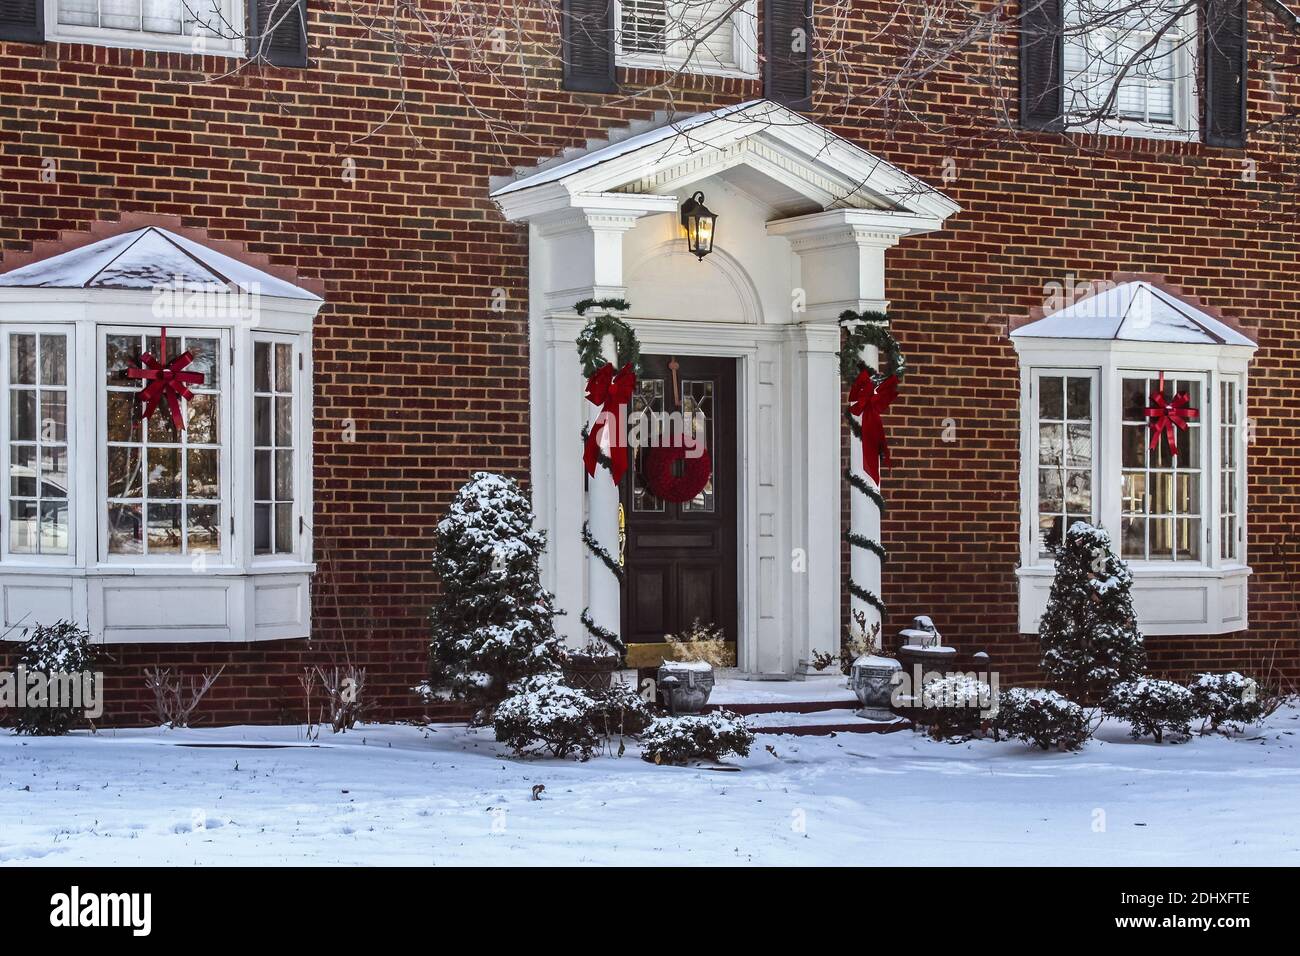 Entry and porch to traditional Georgian style brick house with columns and bay windows decorated for Christmas in the snow Stock Photo